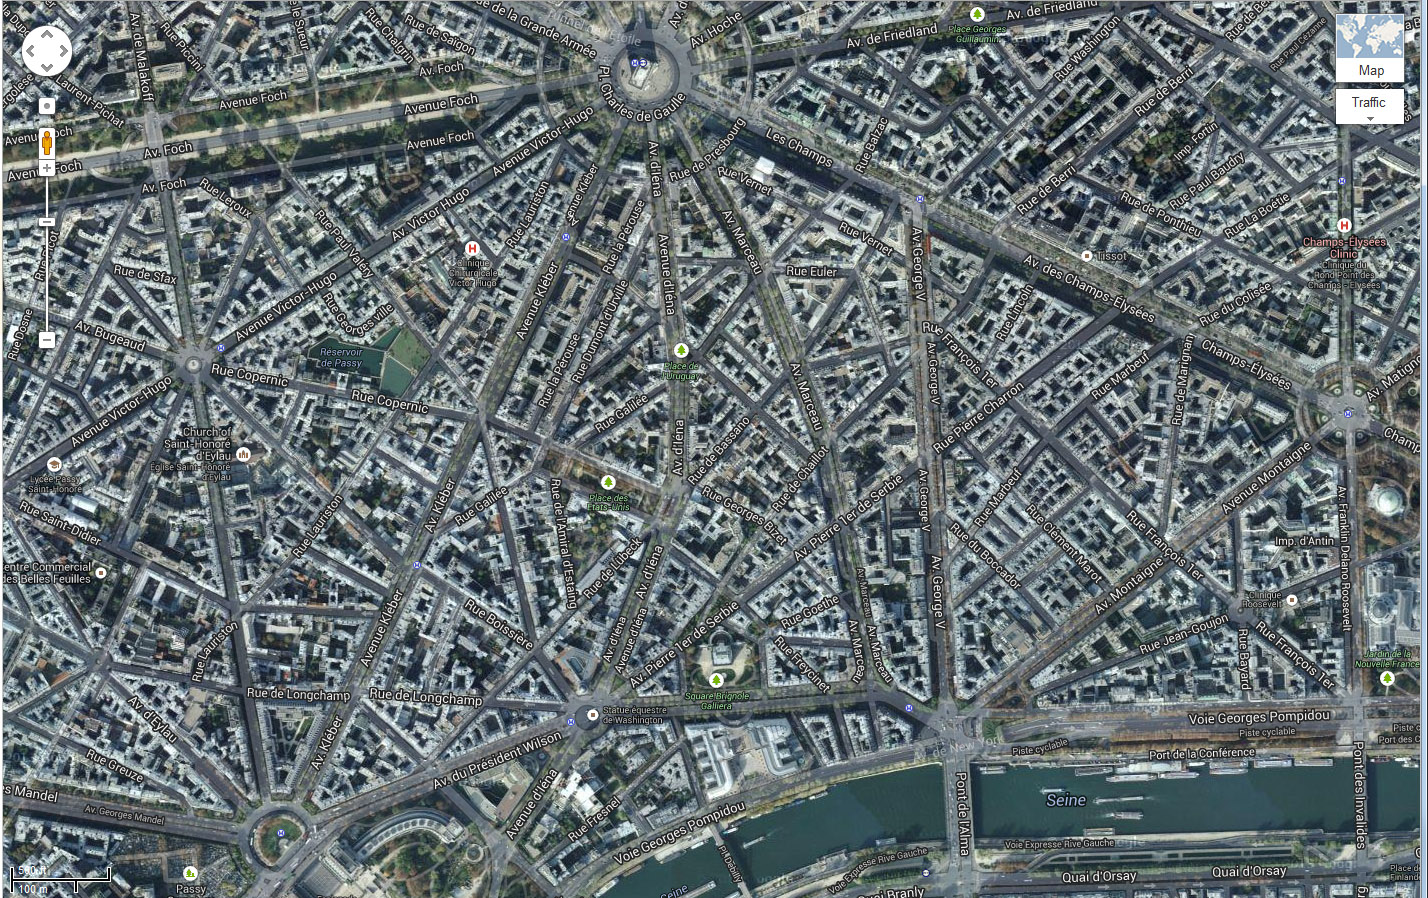 Section of Paris seen from Google Maps